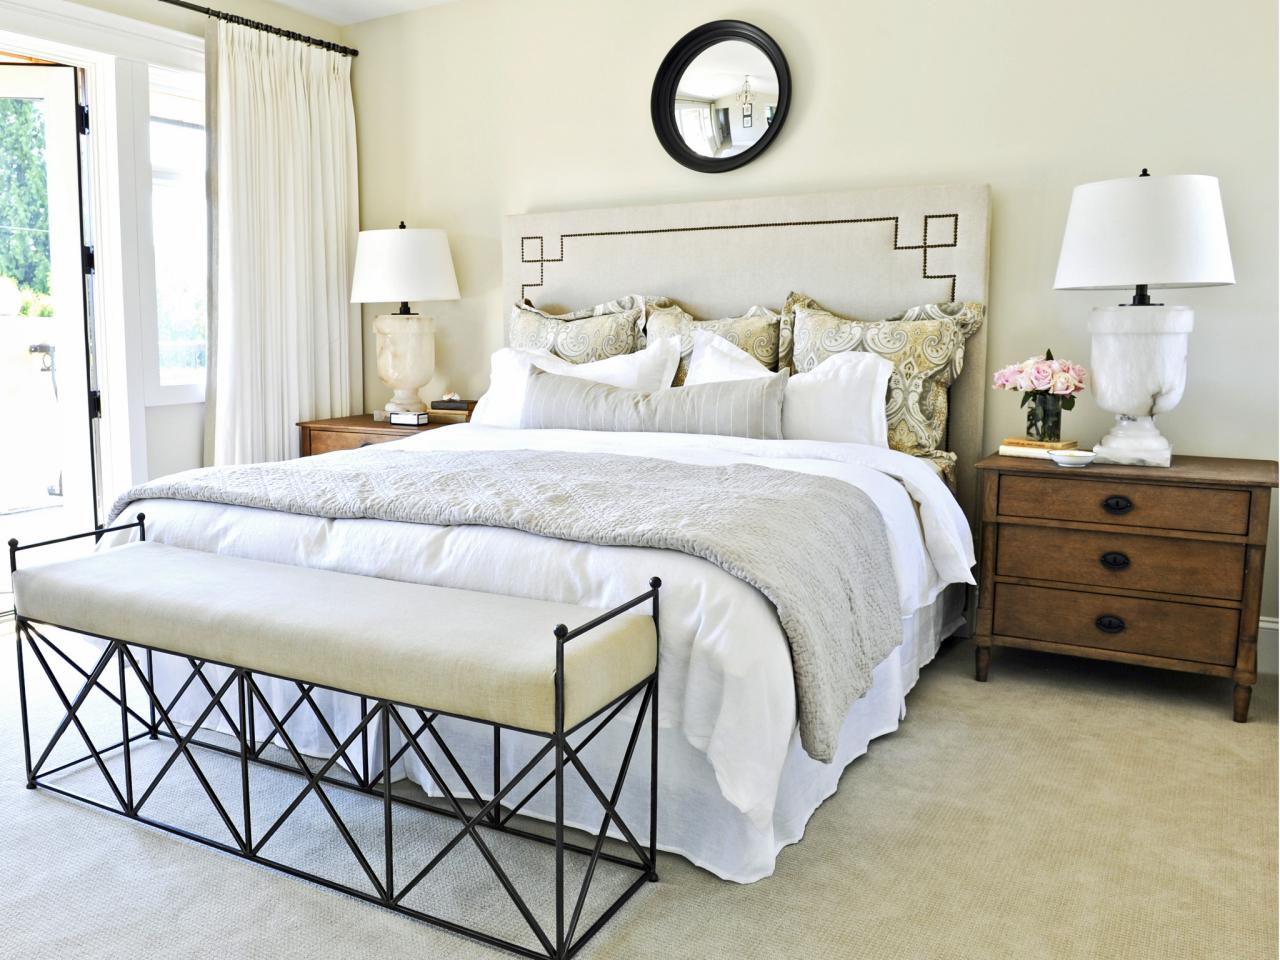 Tricks for Living Large in a Small Bedroom | Bedrooms & Bedroom ...